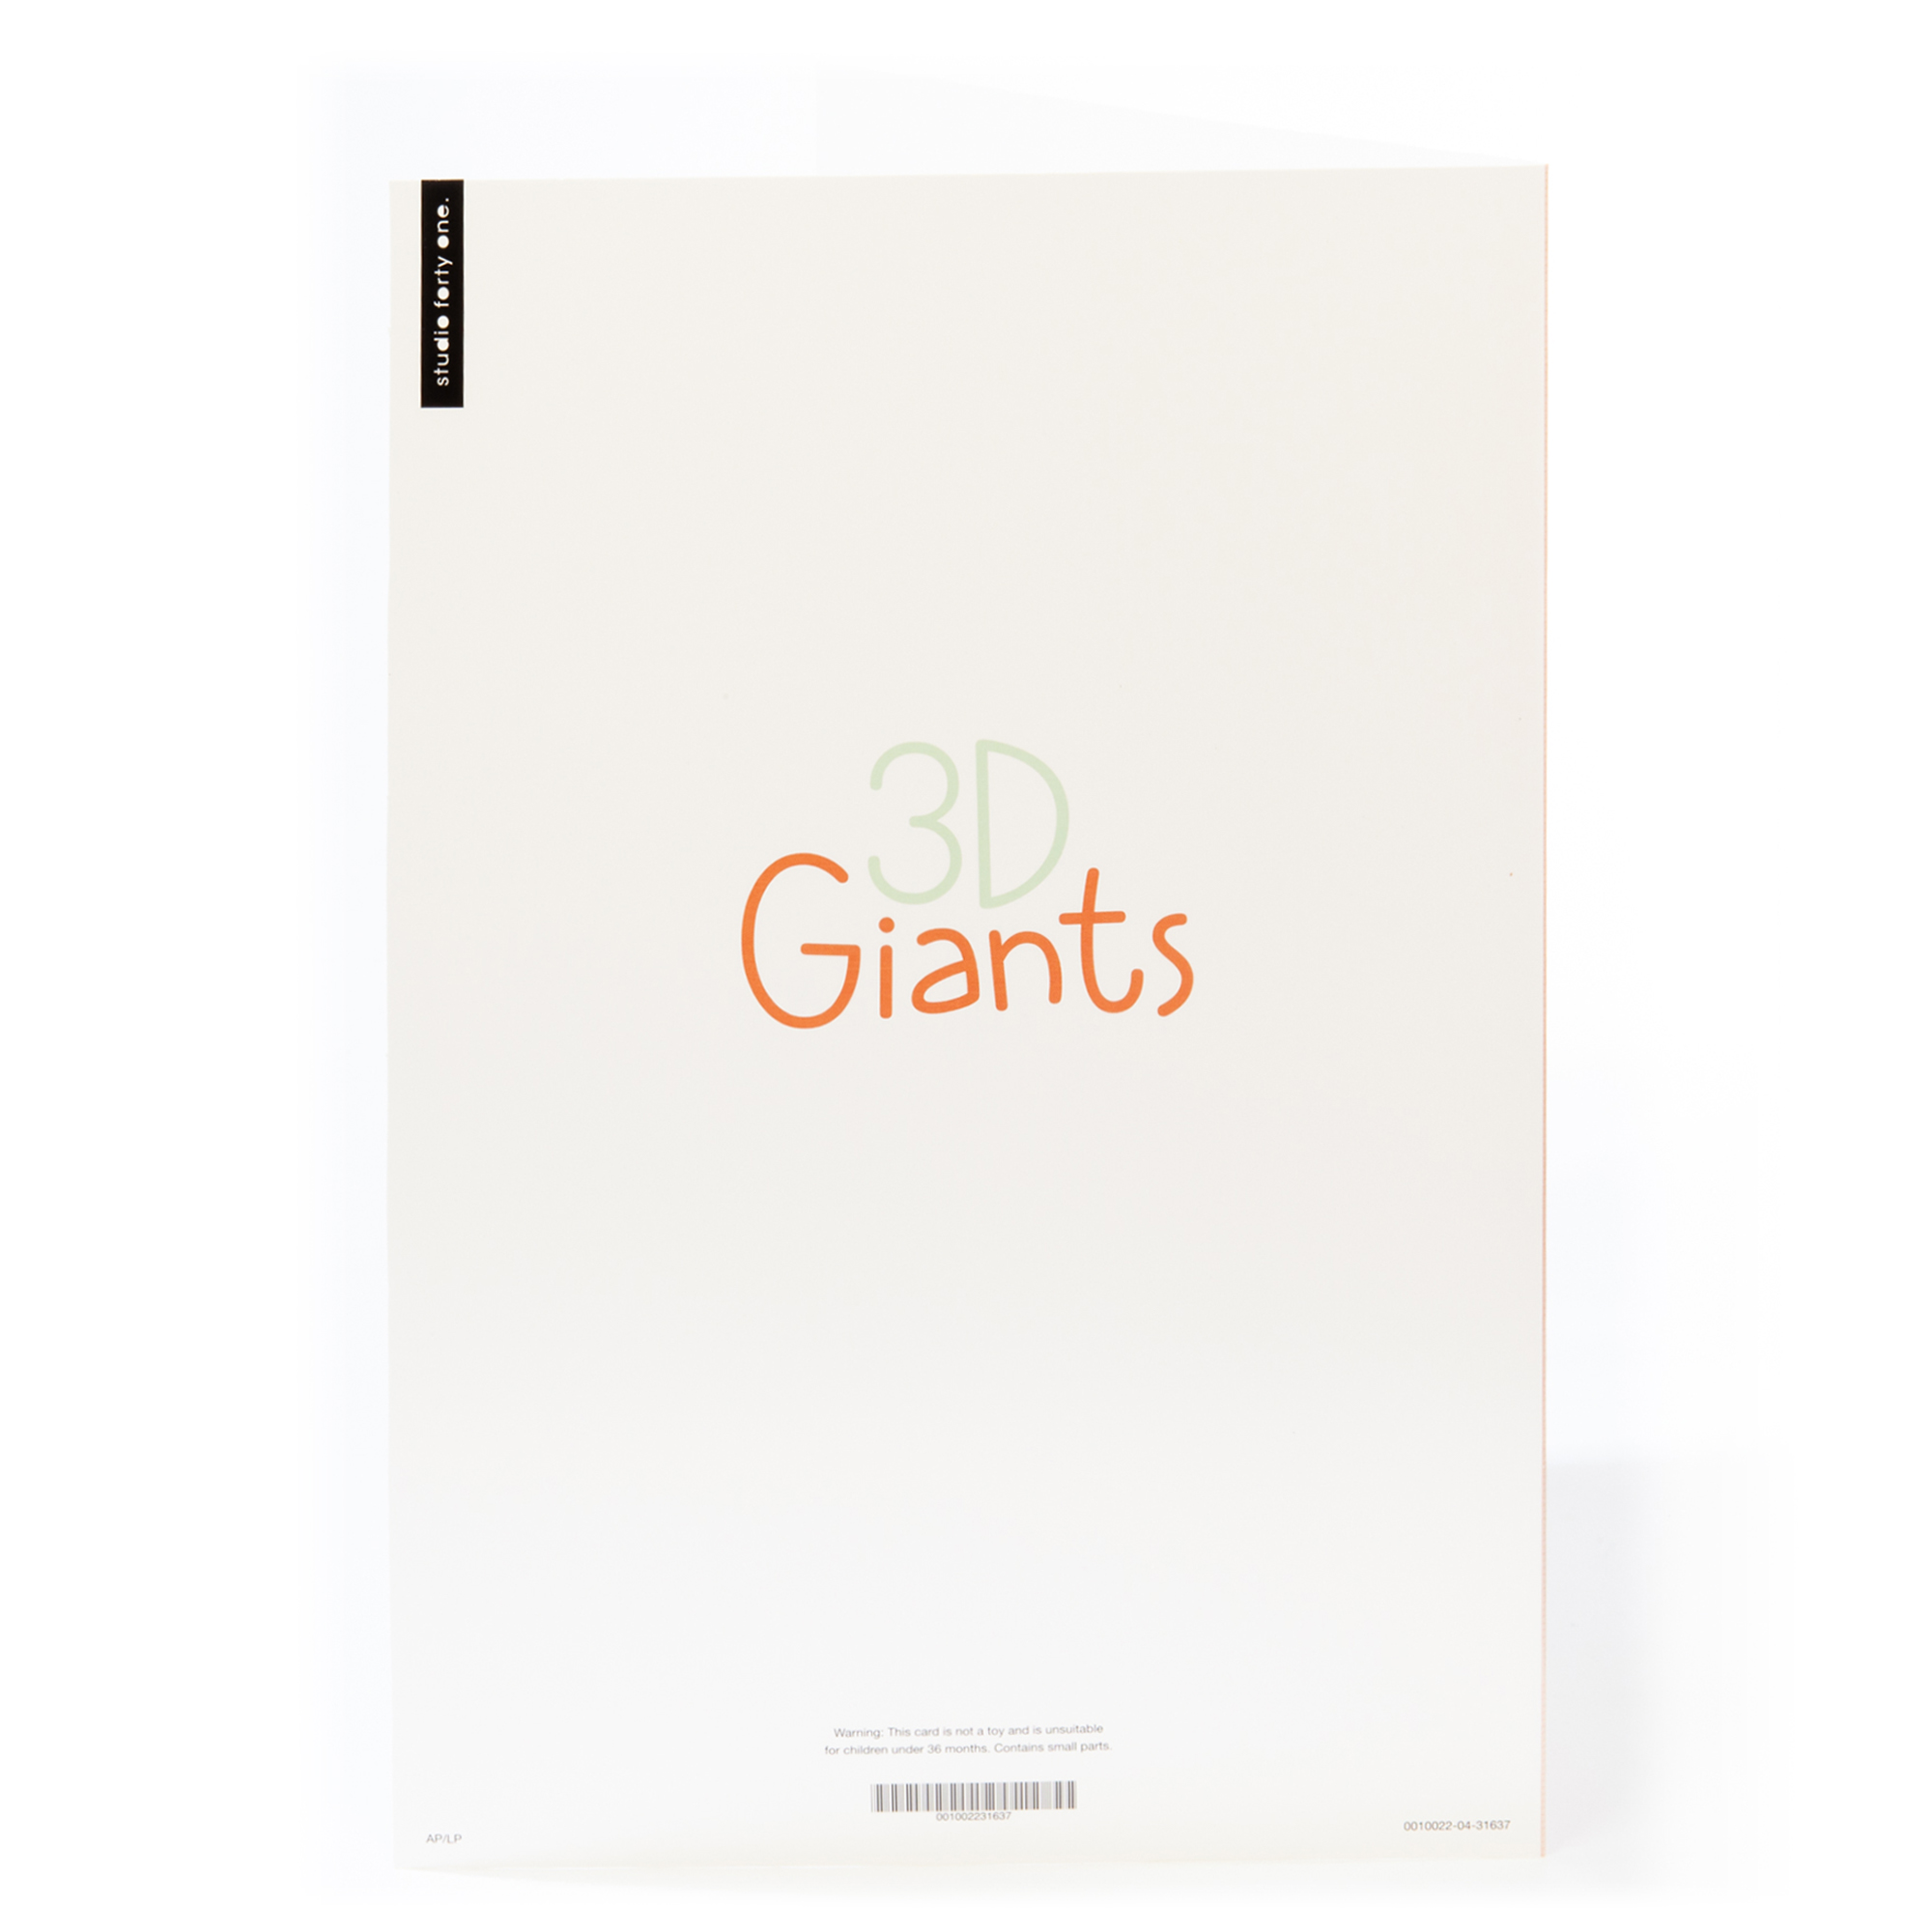 Giant New Baby Card - Baby Girl To Brighten Your World 